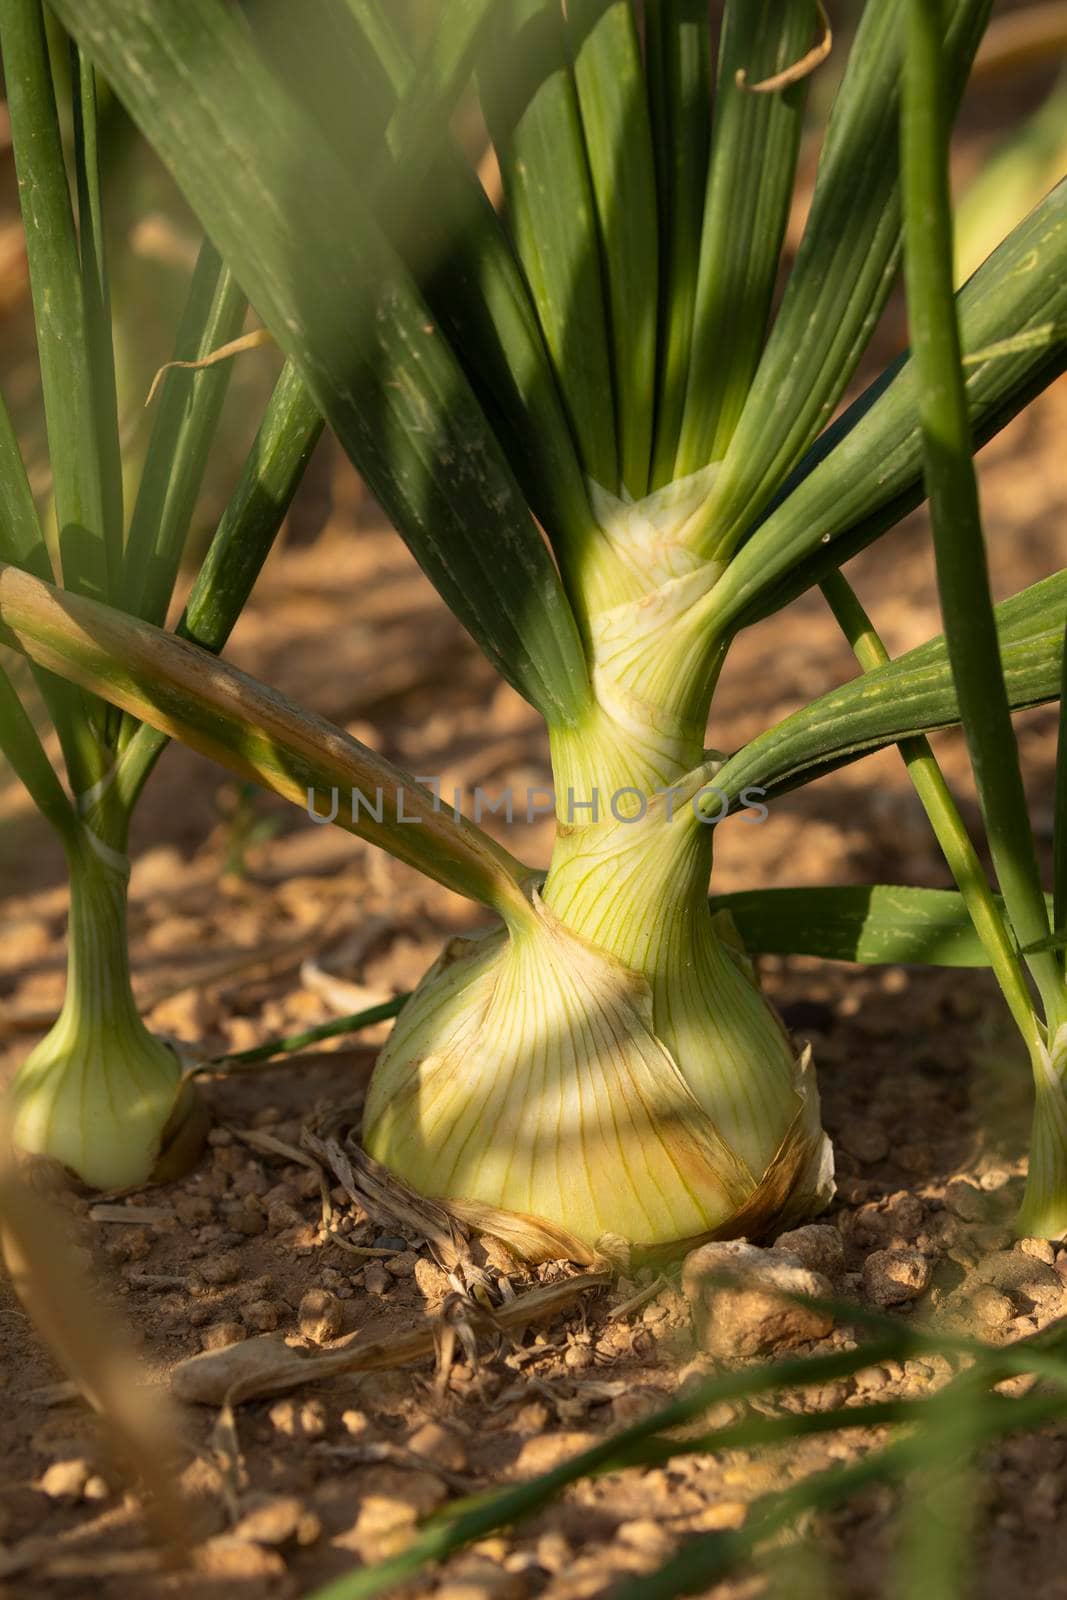 Onions crop in a farm field, agriculture in Spain. by alvarobueno